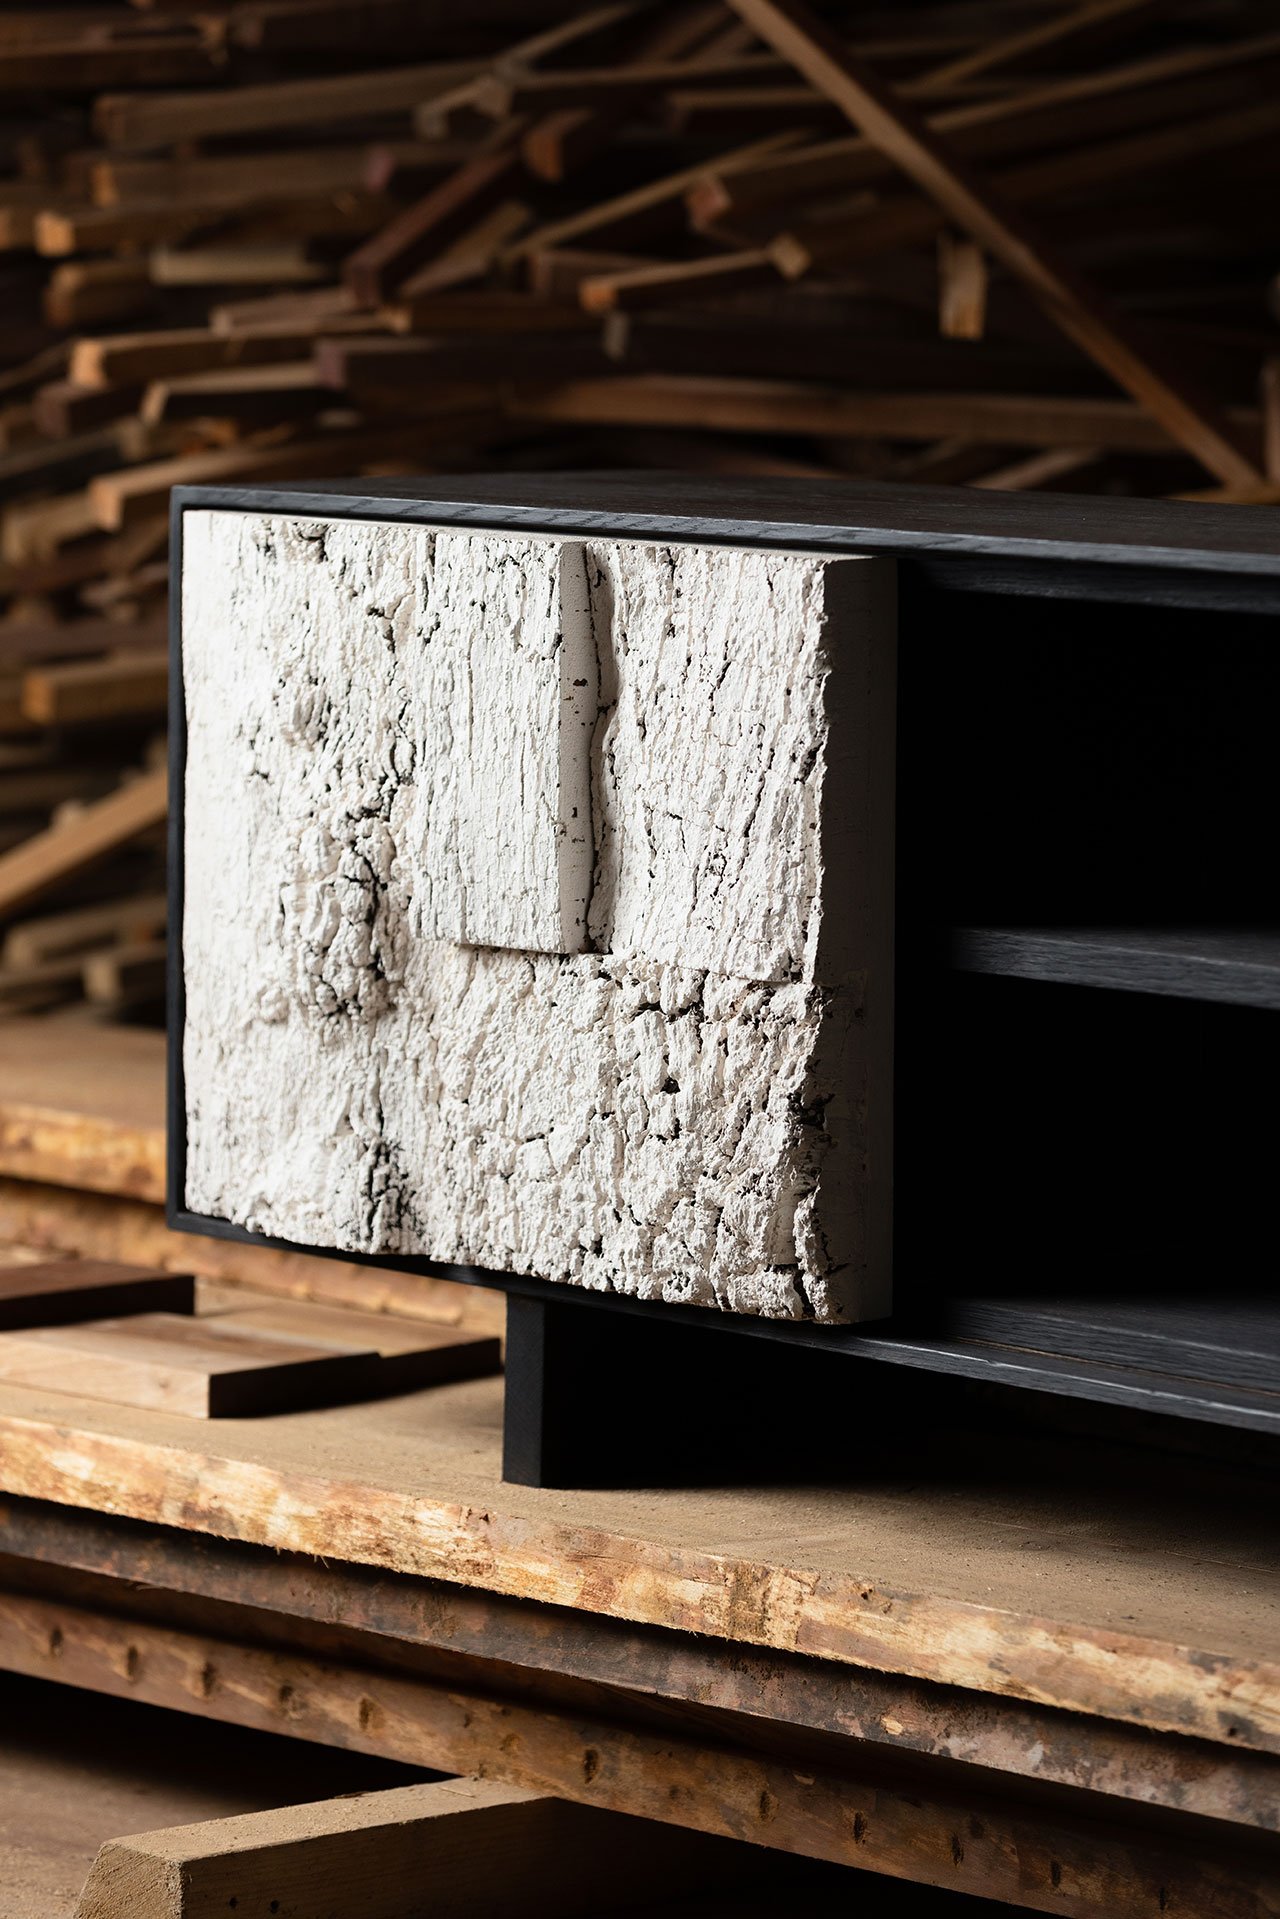 Corcho Collection by Barracão studio (Vasco Fragoso Mendes).
Charred Oak and Cork sideboard.150 x 40 x 50cm.
2023
© Barracao.